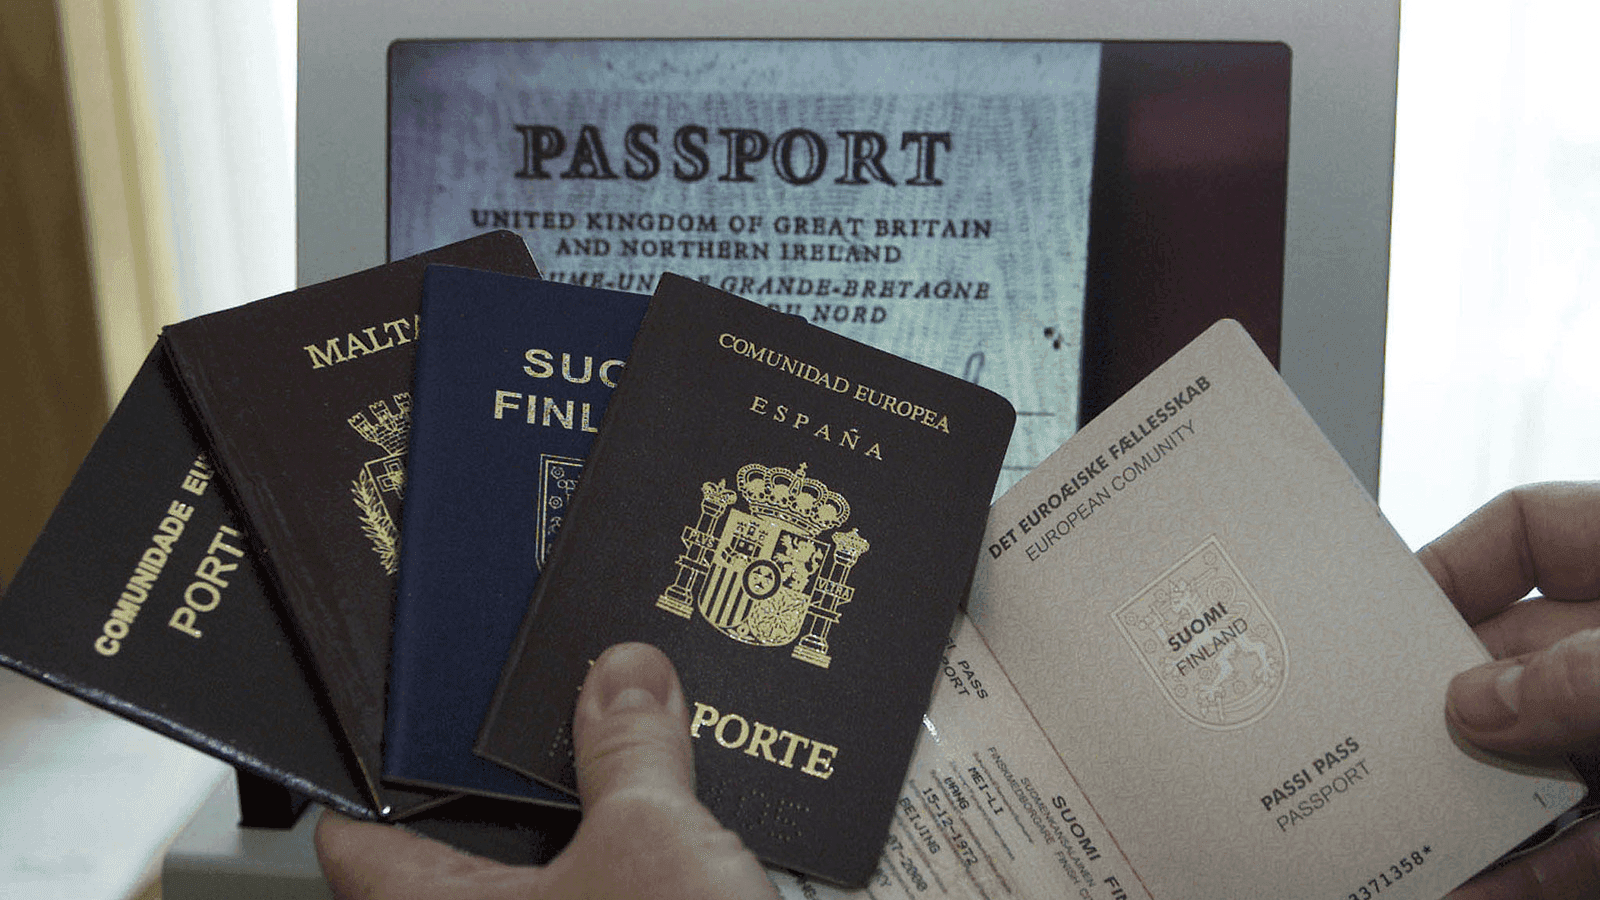 passports from several countries